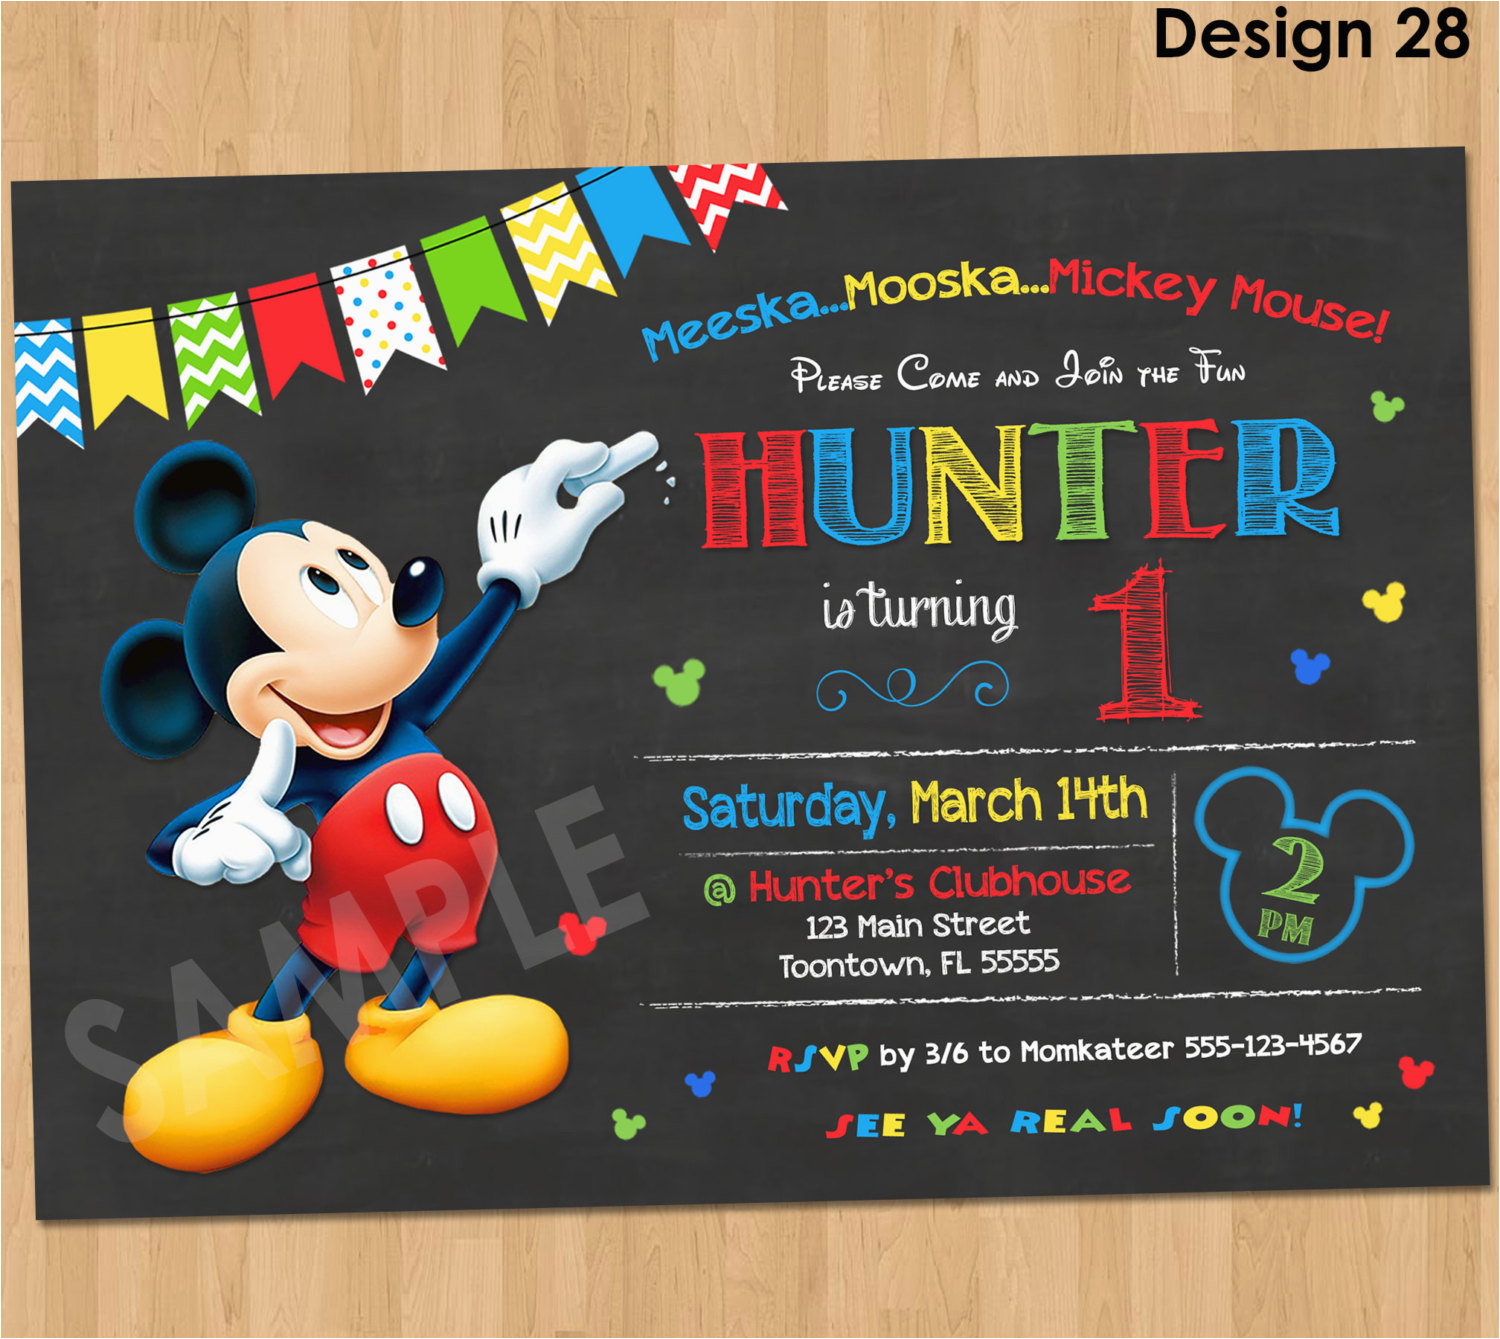 How to Make Mickey Mouse Birthday Invitations Mickey Mouse Birthday Invitation Mickey Mouse Clubhouse